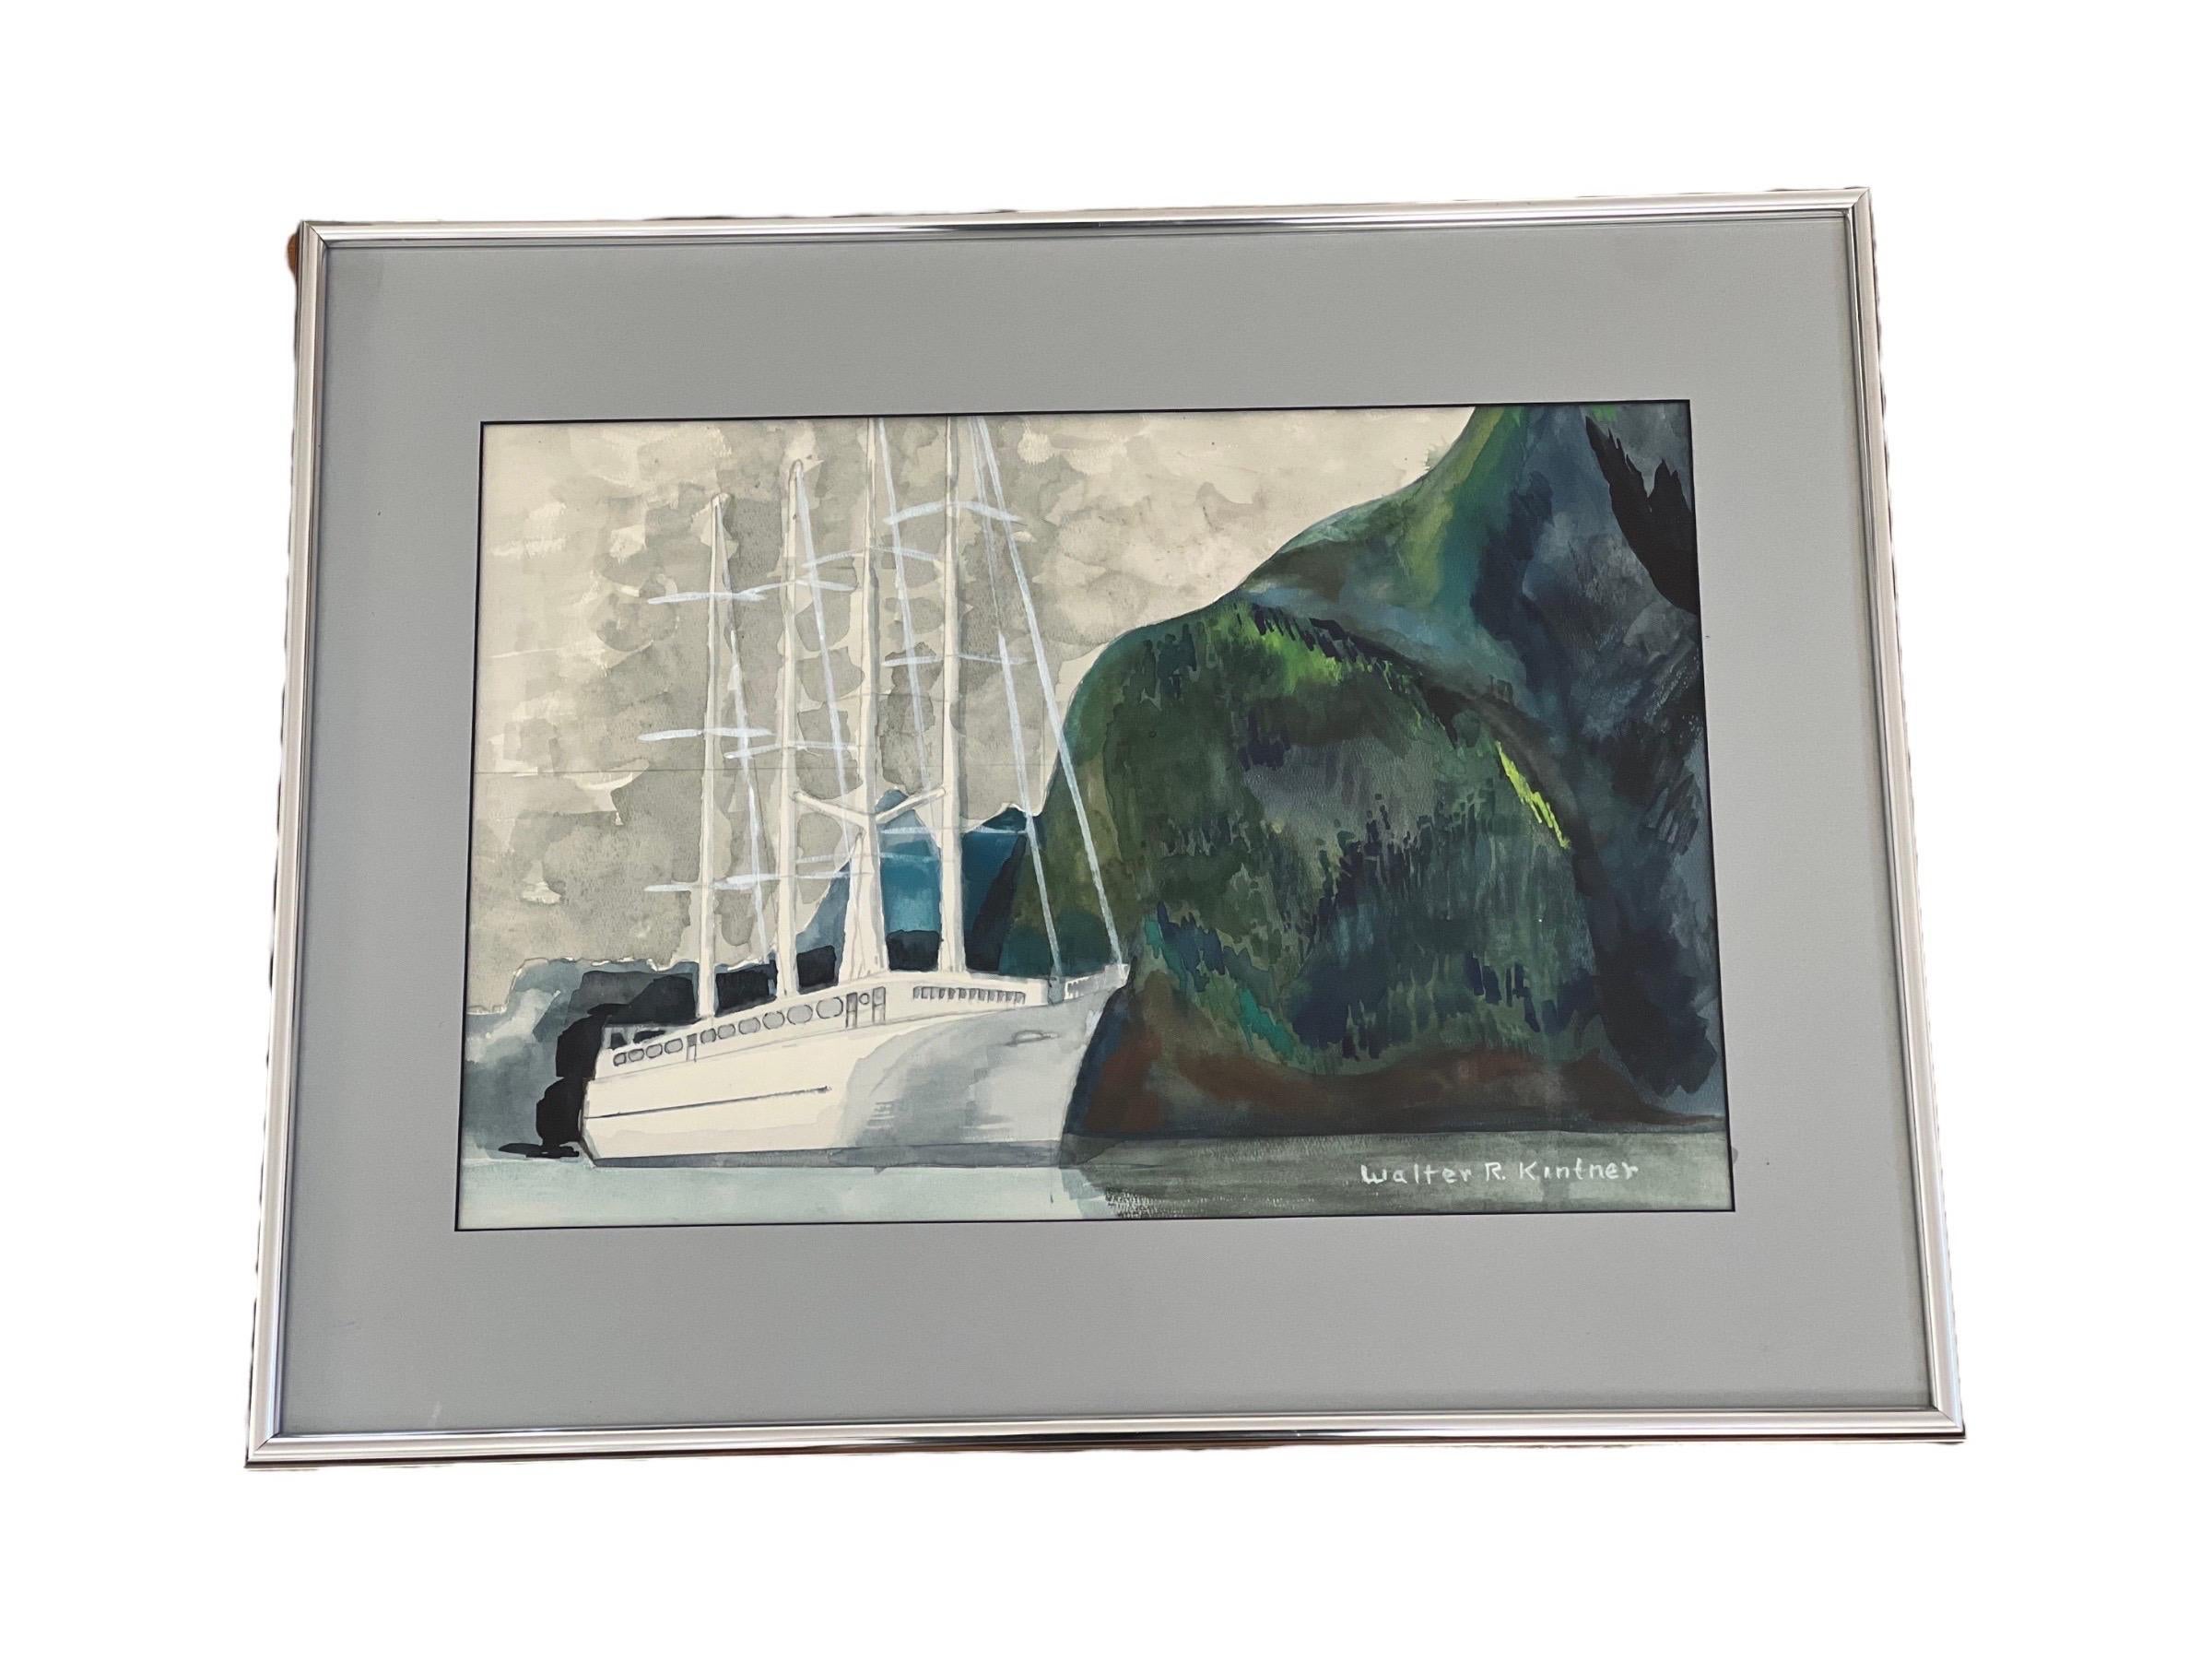 Vintage Signed framed Art by Walter R. .Kintner
Possibly Mixed Media Pencil and water Media.

Dimensions 22 1/2 W ; 28 1/2 H.